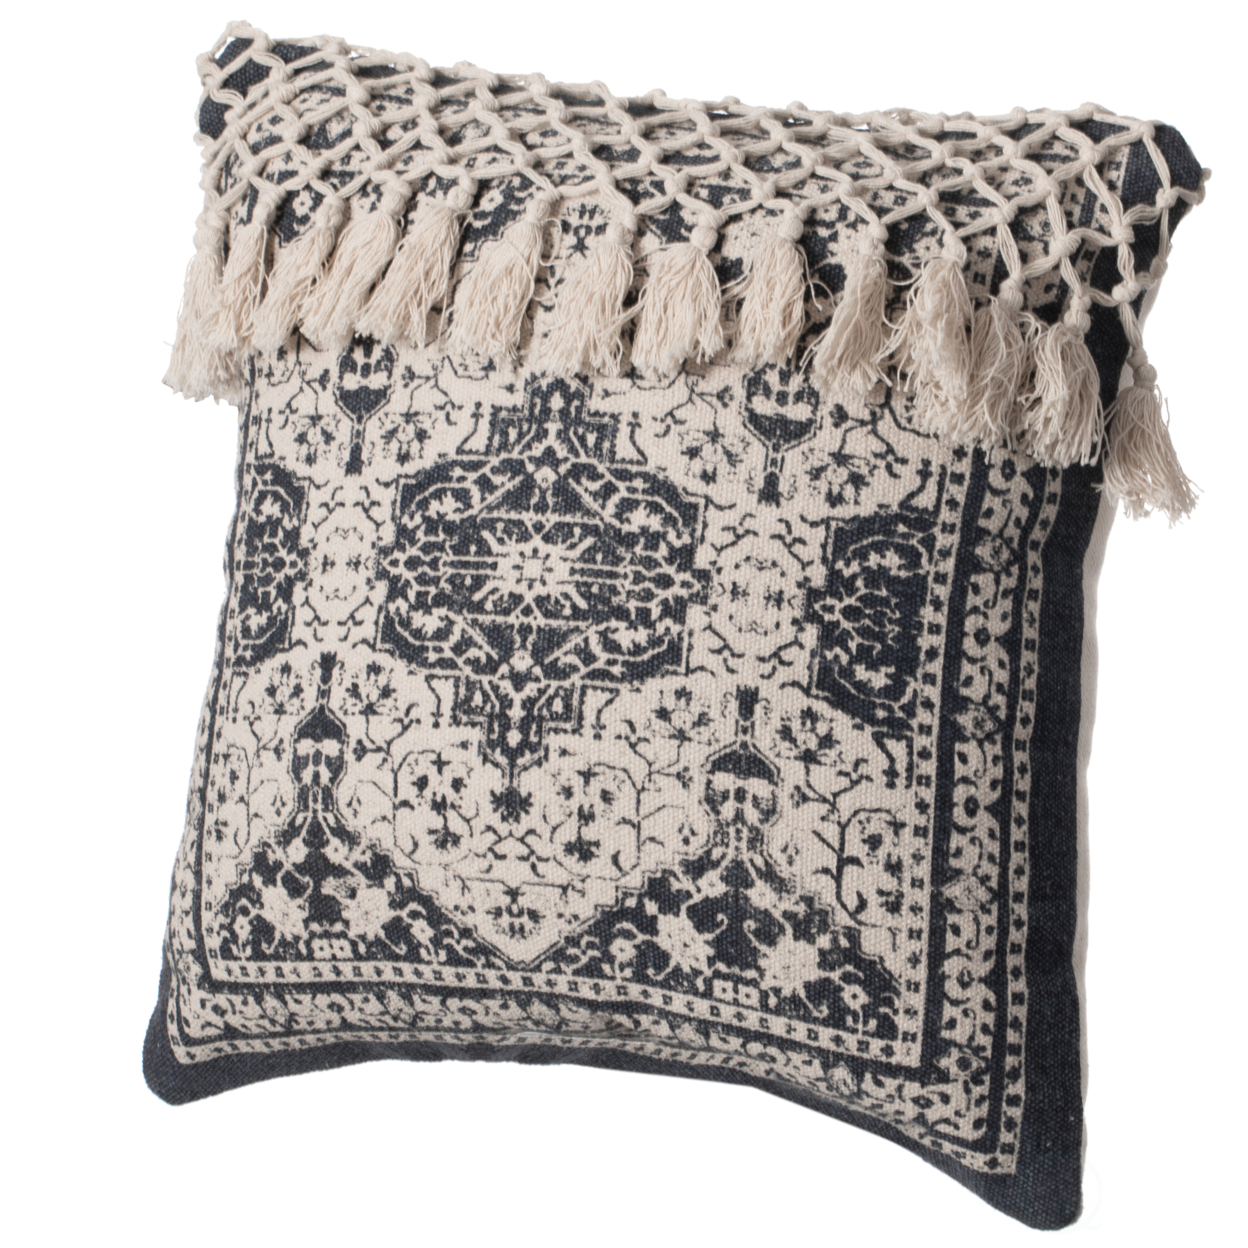 16 Handwoven Cotton Throw Pillow Cover With Traditional Pattern And Tasseled Top - Navy With Cushion